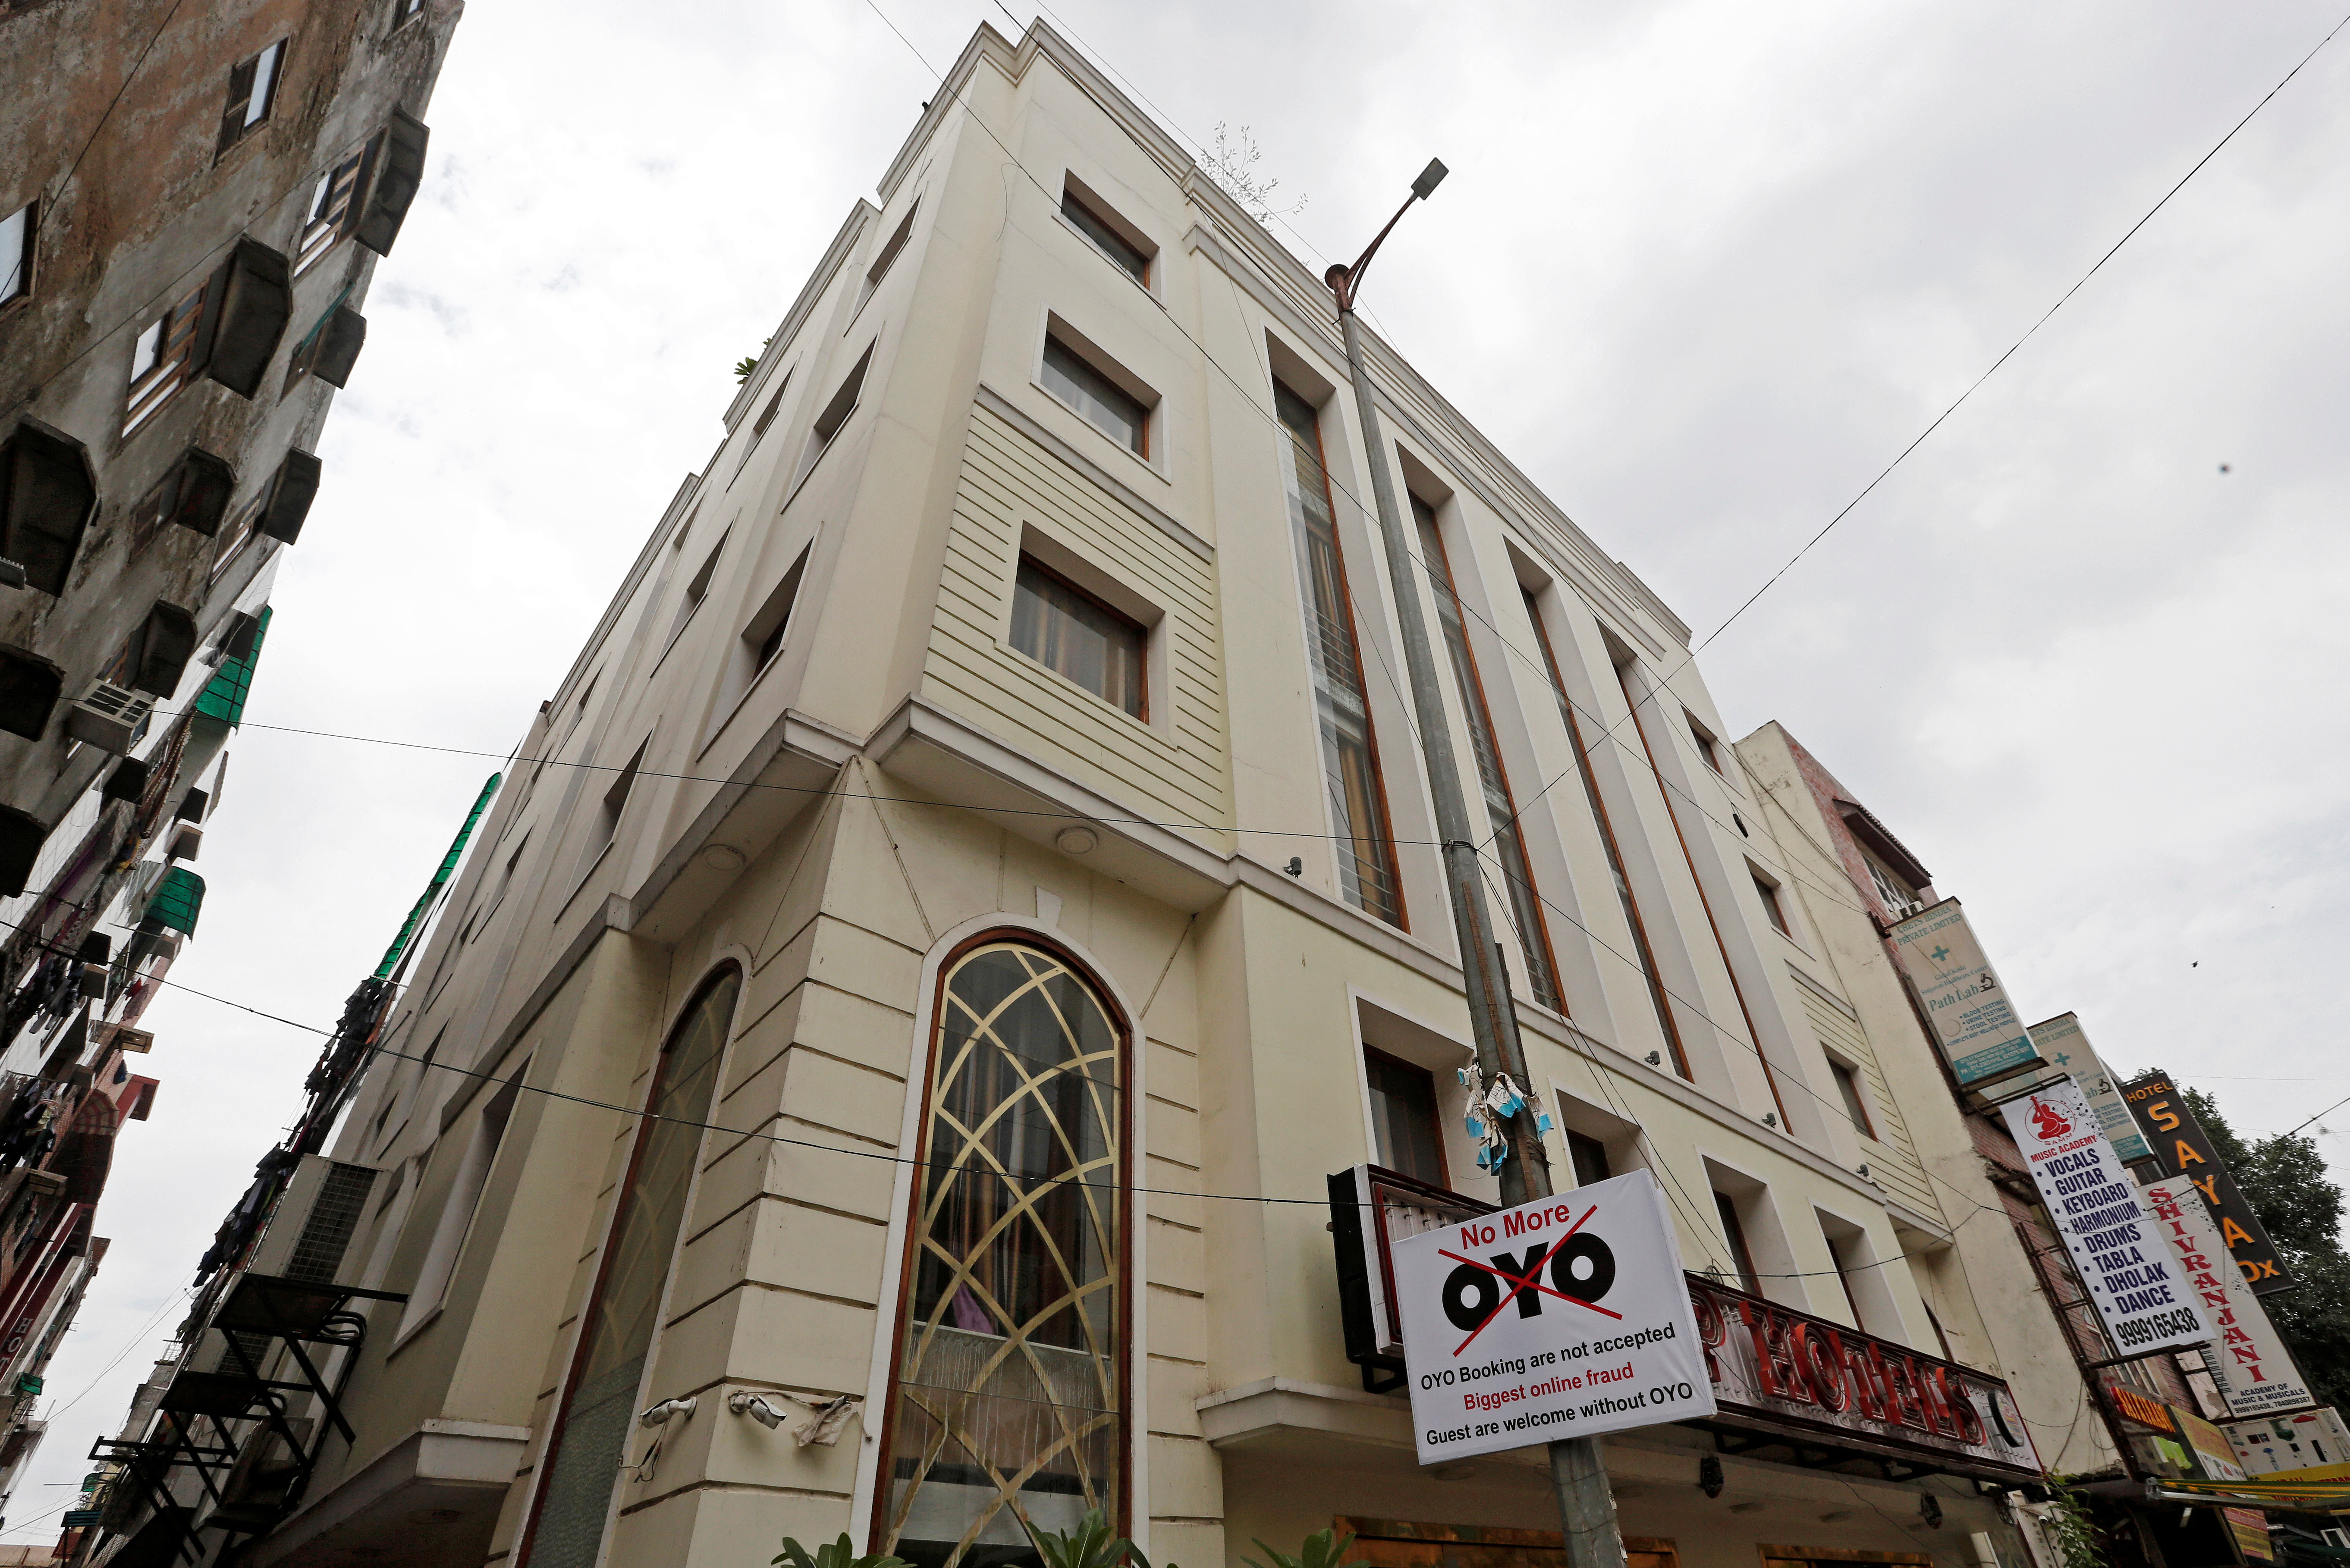 A sign against Oyo is seen outside a hotel in New Delhi